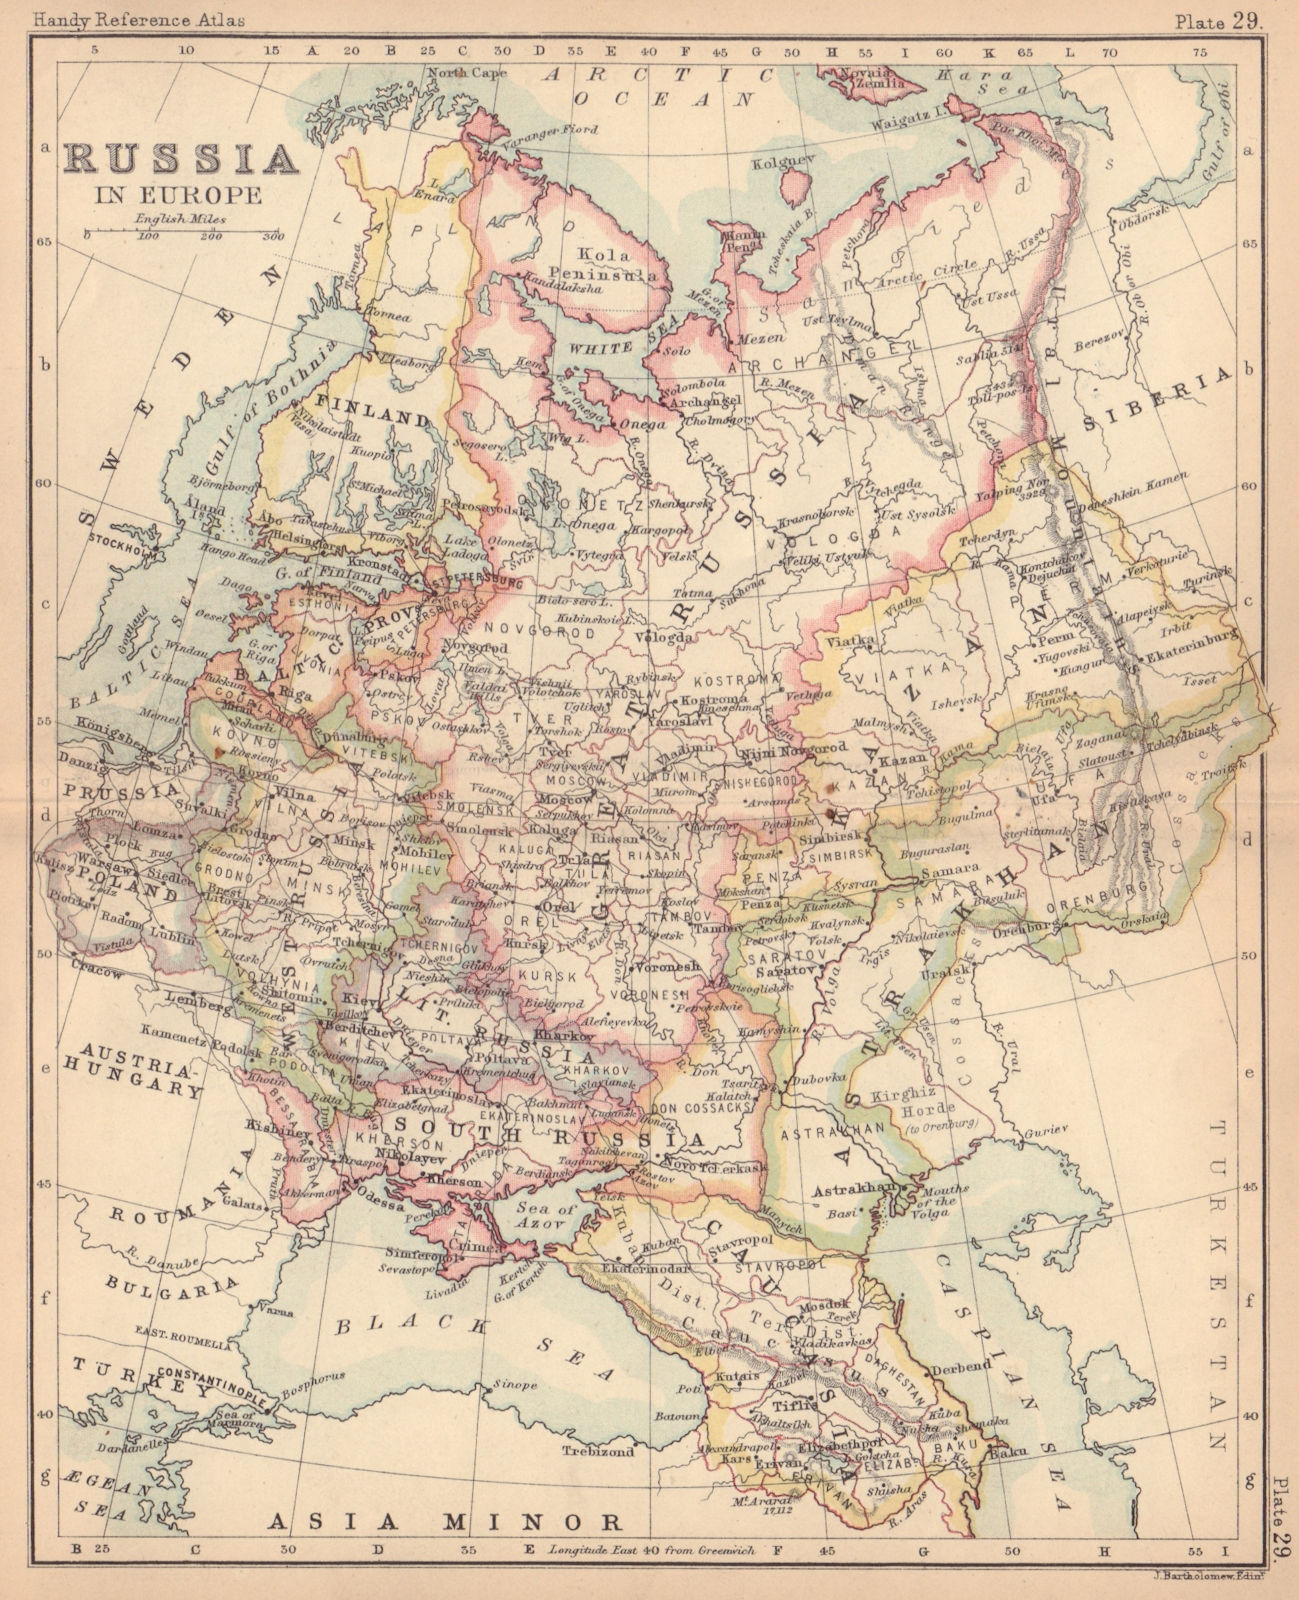 Russia in Europe. Poland. West/Little/Great/South Russia. BARTHOLOMEW 1888 map